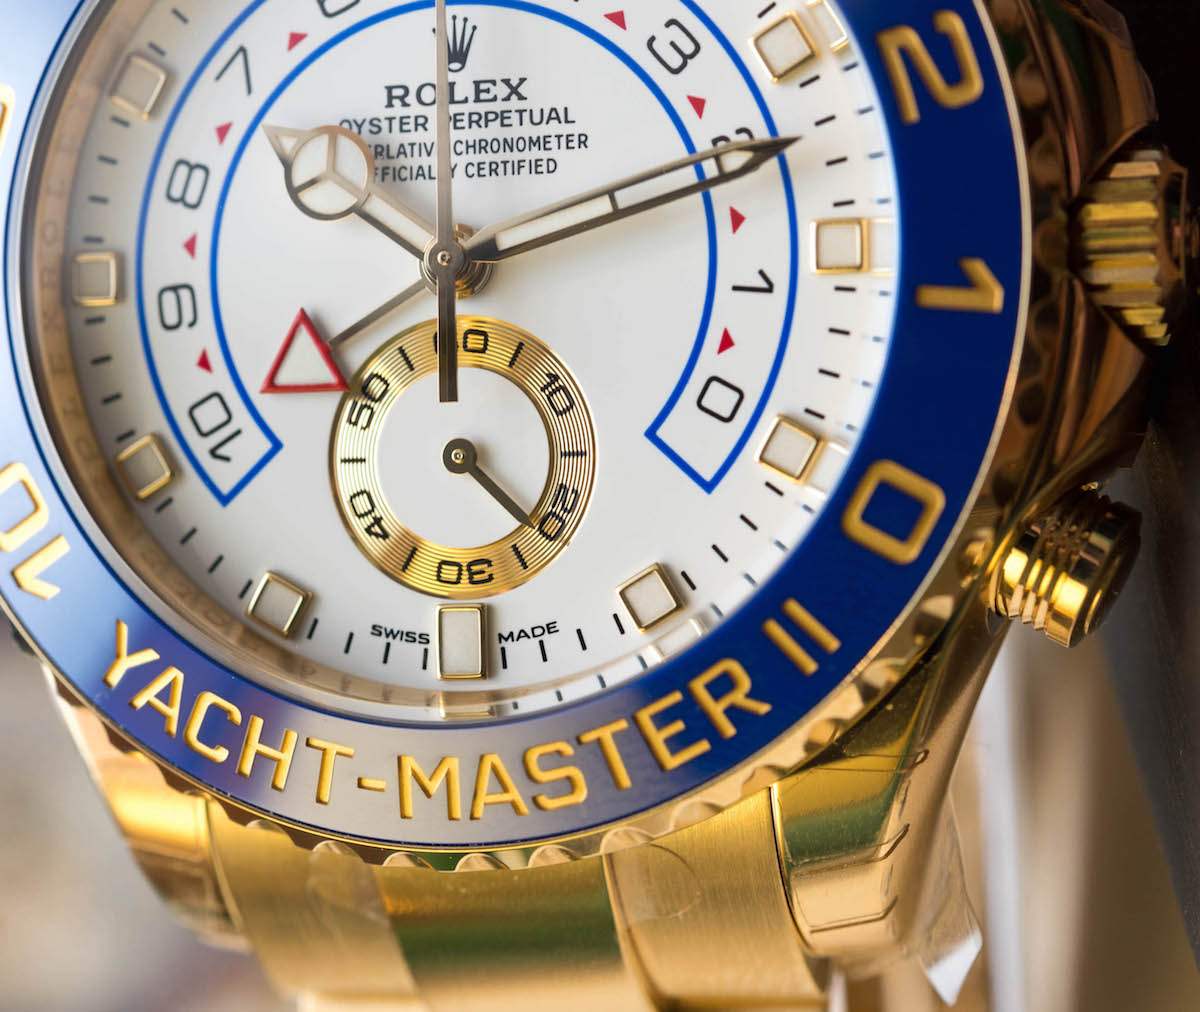 Rolex Oyster Perpetual Yacht-Master II Hands-On